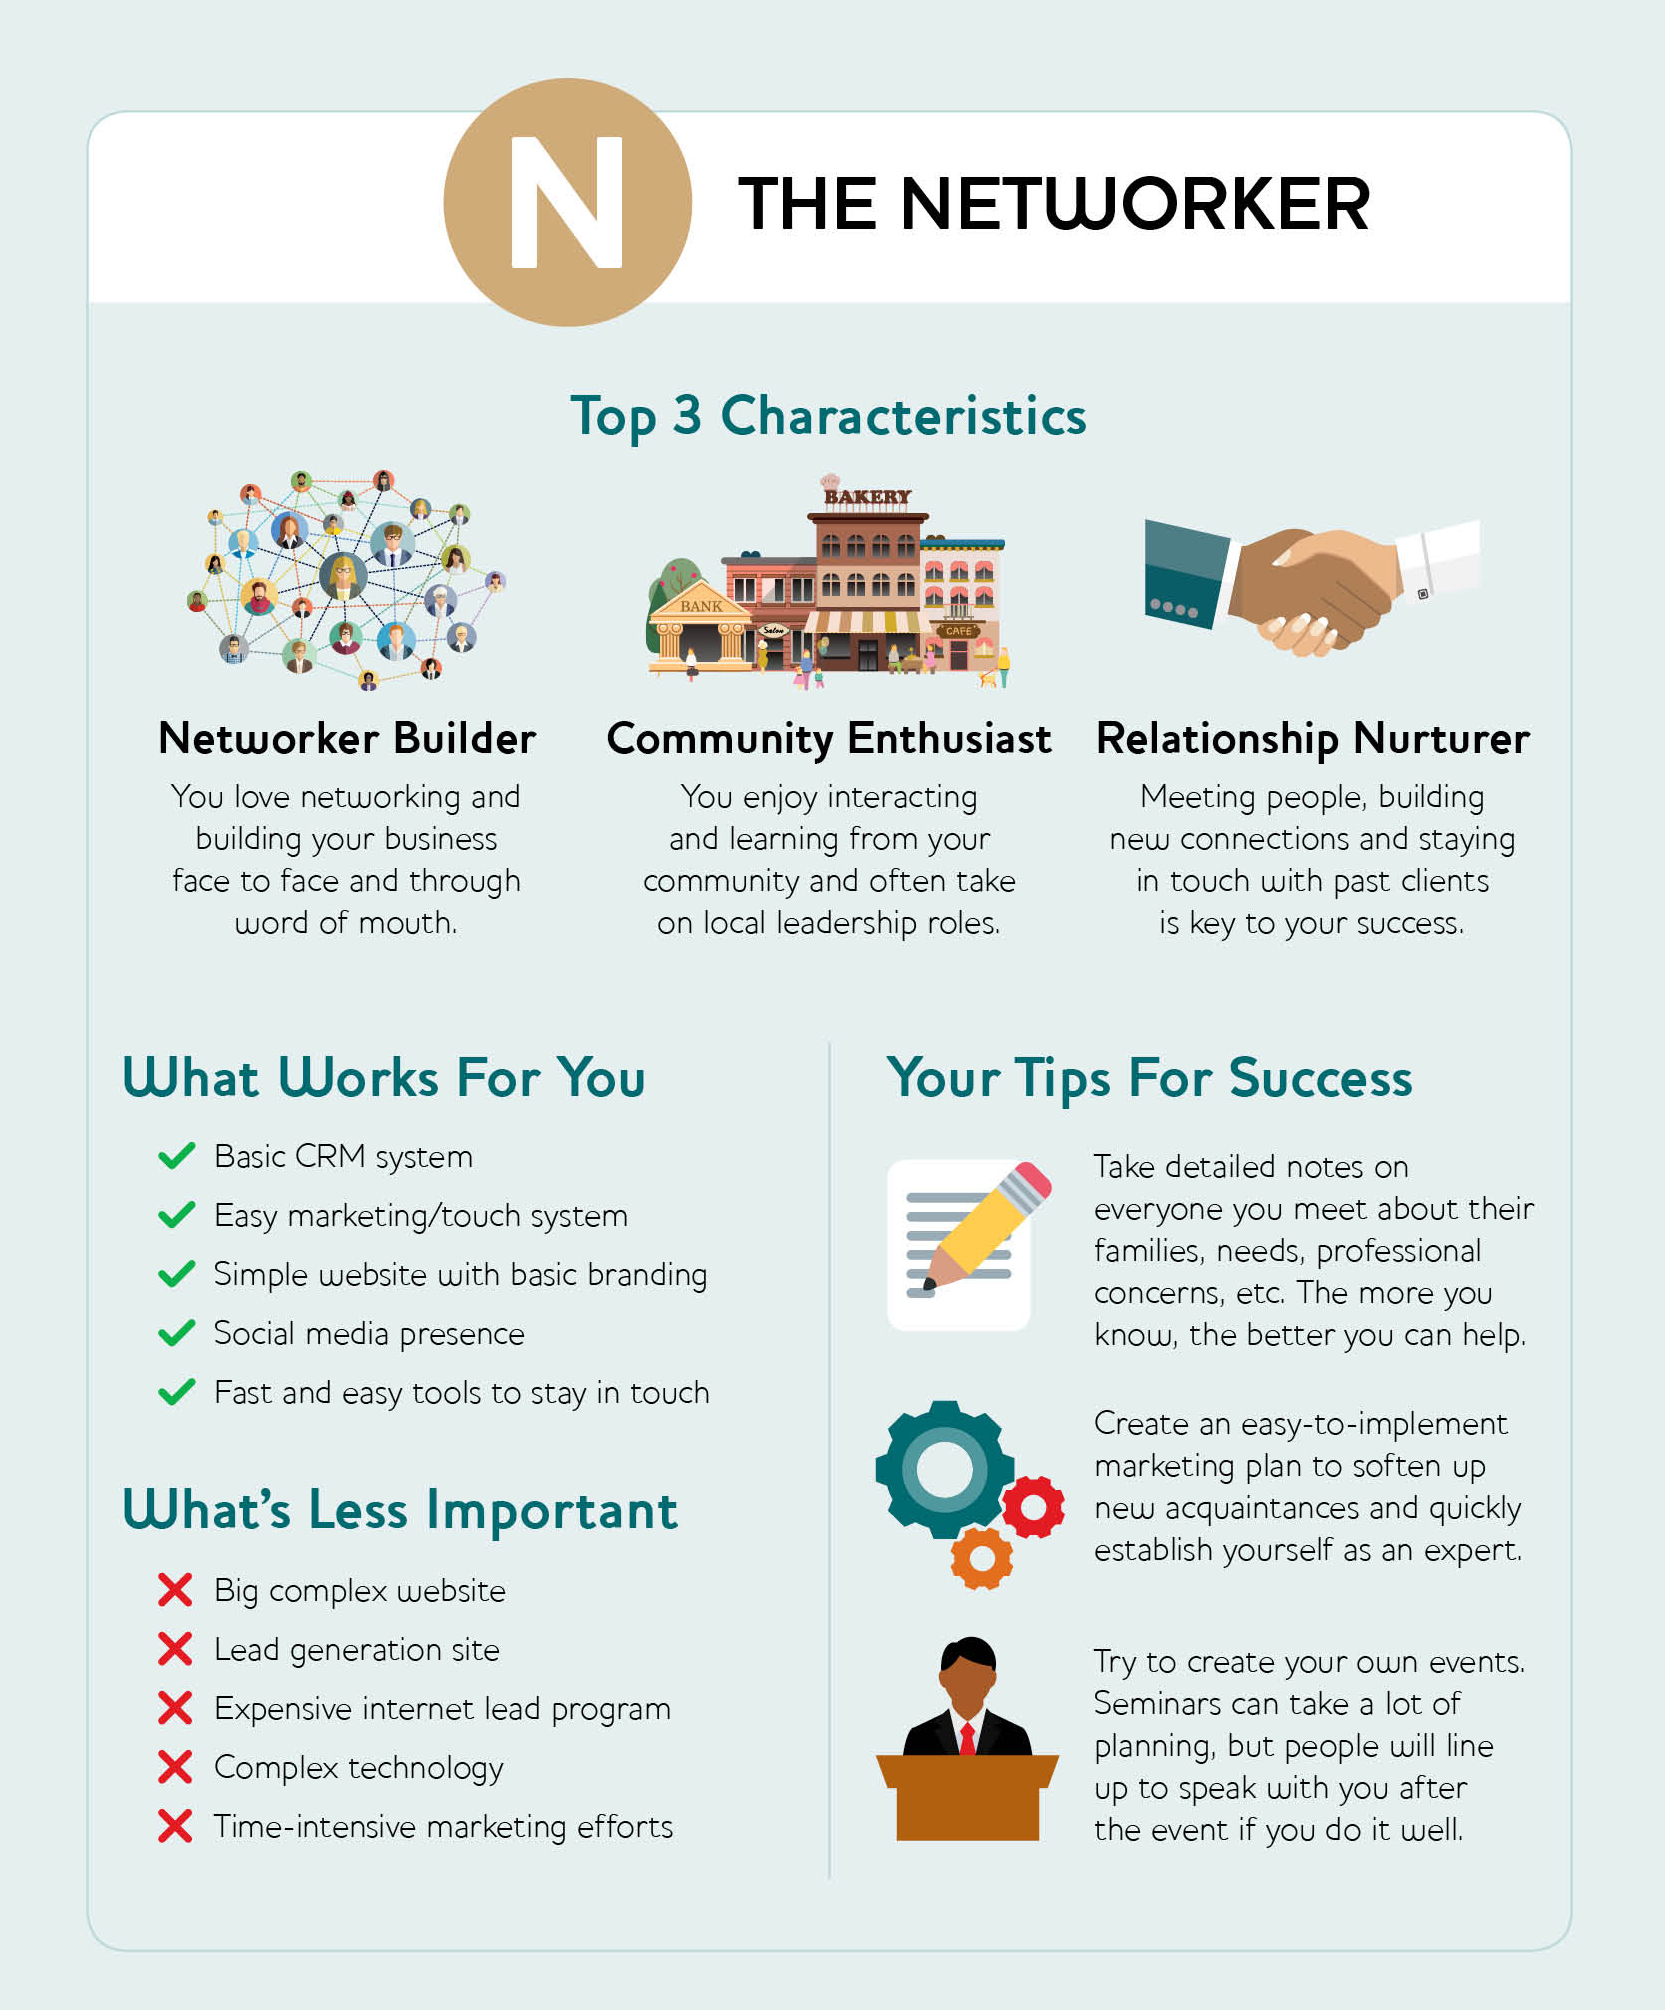 infographic: the networker -- 3 main characteristics, what works best, tips for success